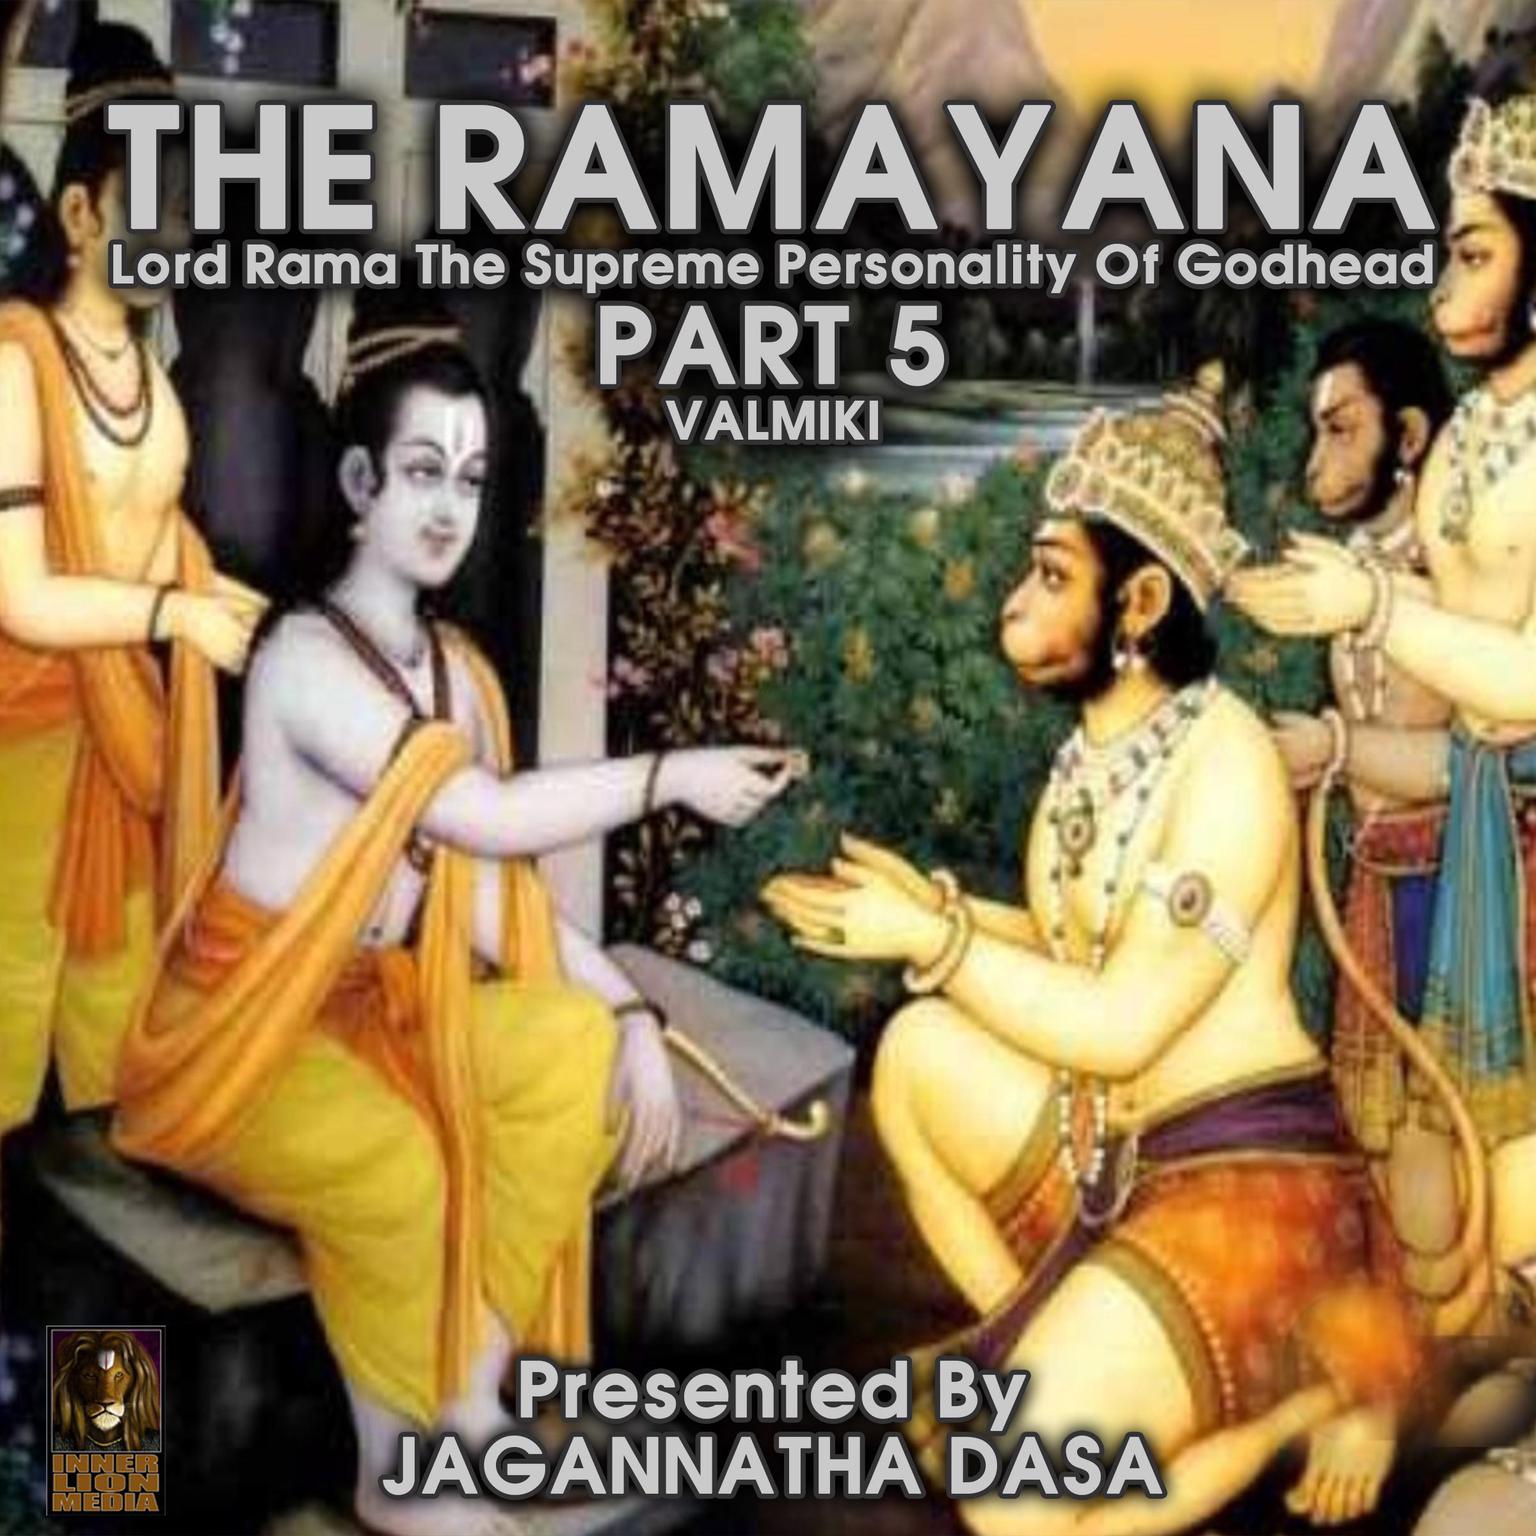 The Ramayana Lord Rama The Supreme Personality Of Godhead - Part 5 (Abridged) Audiobook, by Valmiki 